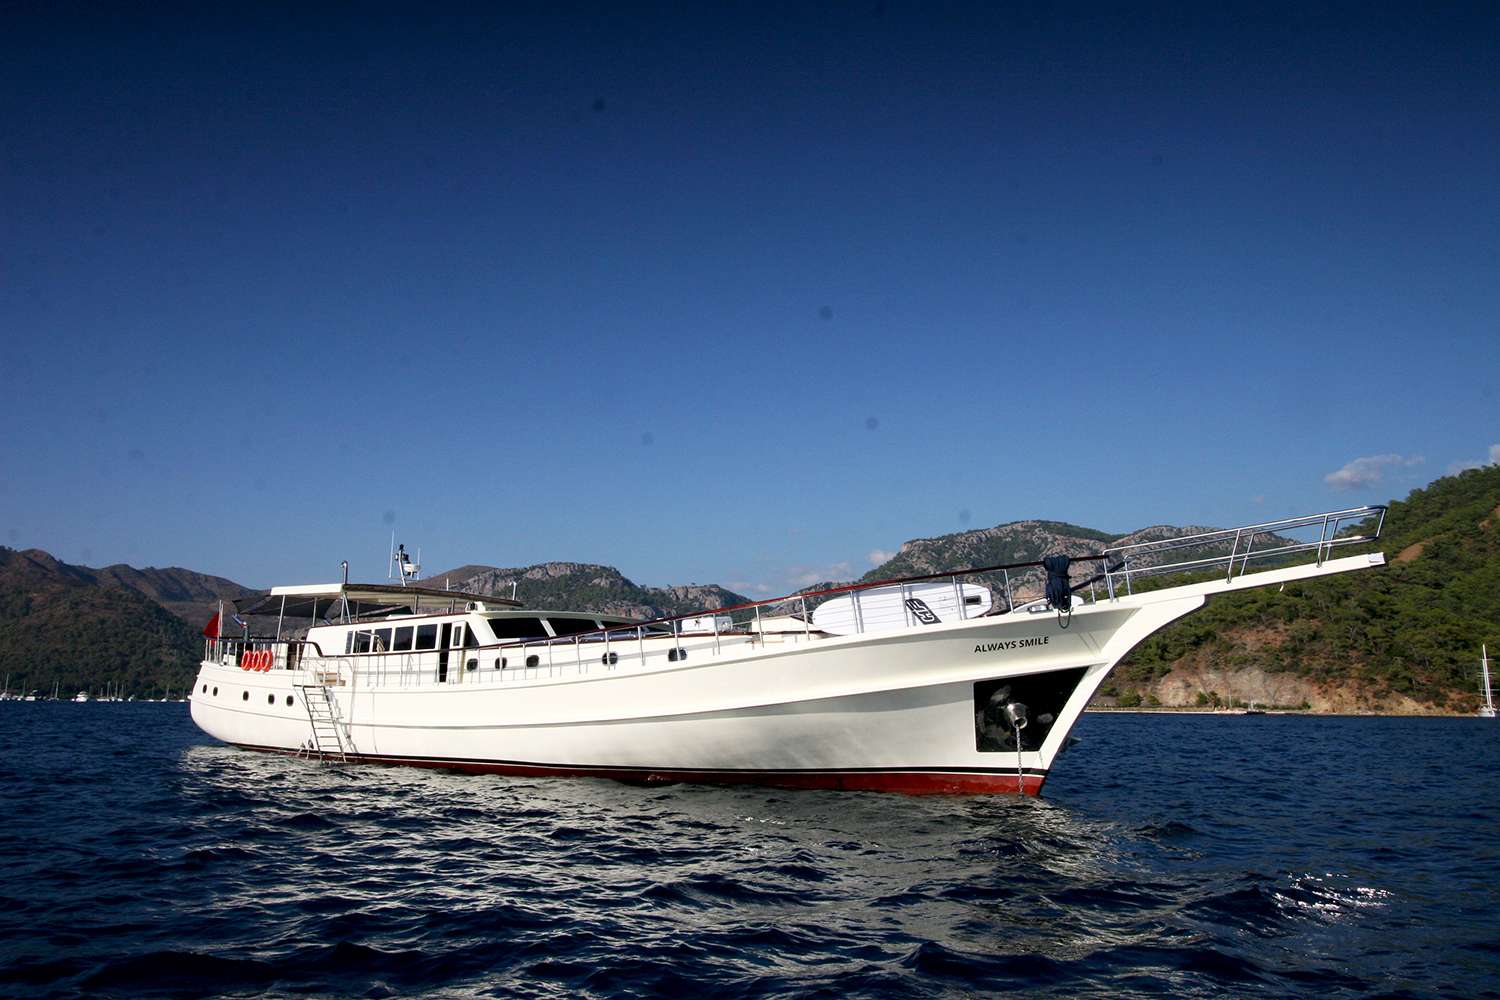 ALWAYS SMILE - Yacht Charter Istanbul & Boat hire in Turkey 1